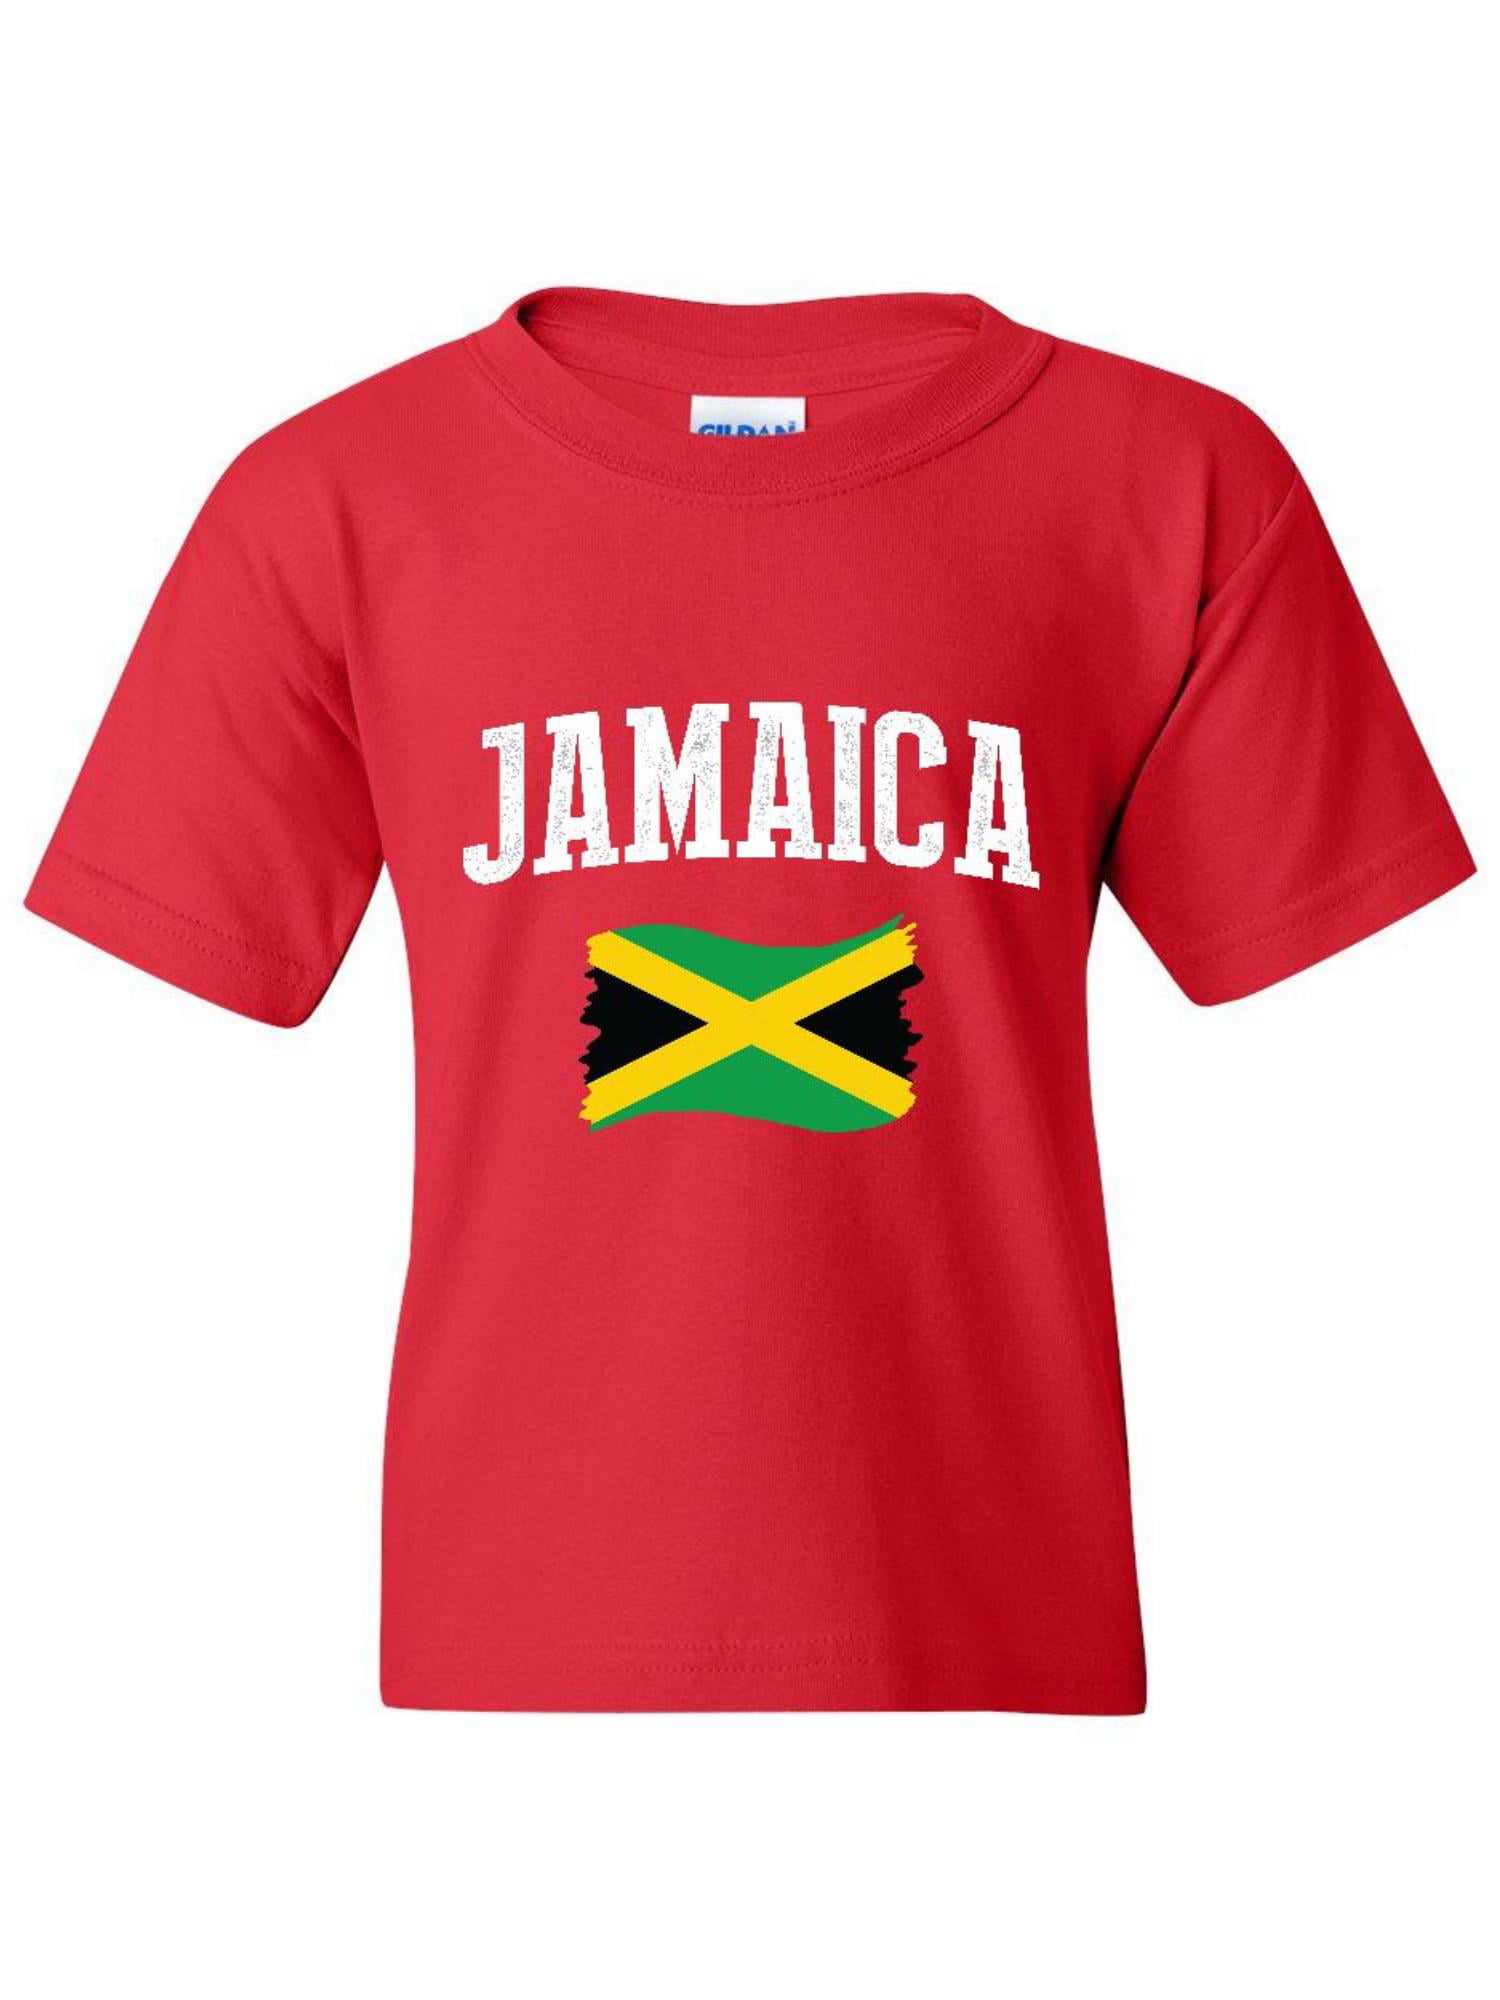 Jamaica Baby Bodysuit 100% Cotton Soccer Country Flag T-Shirt All Black 